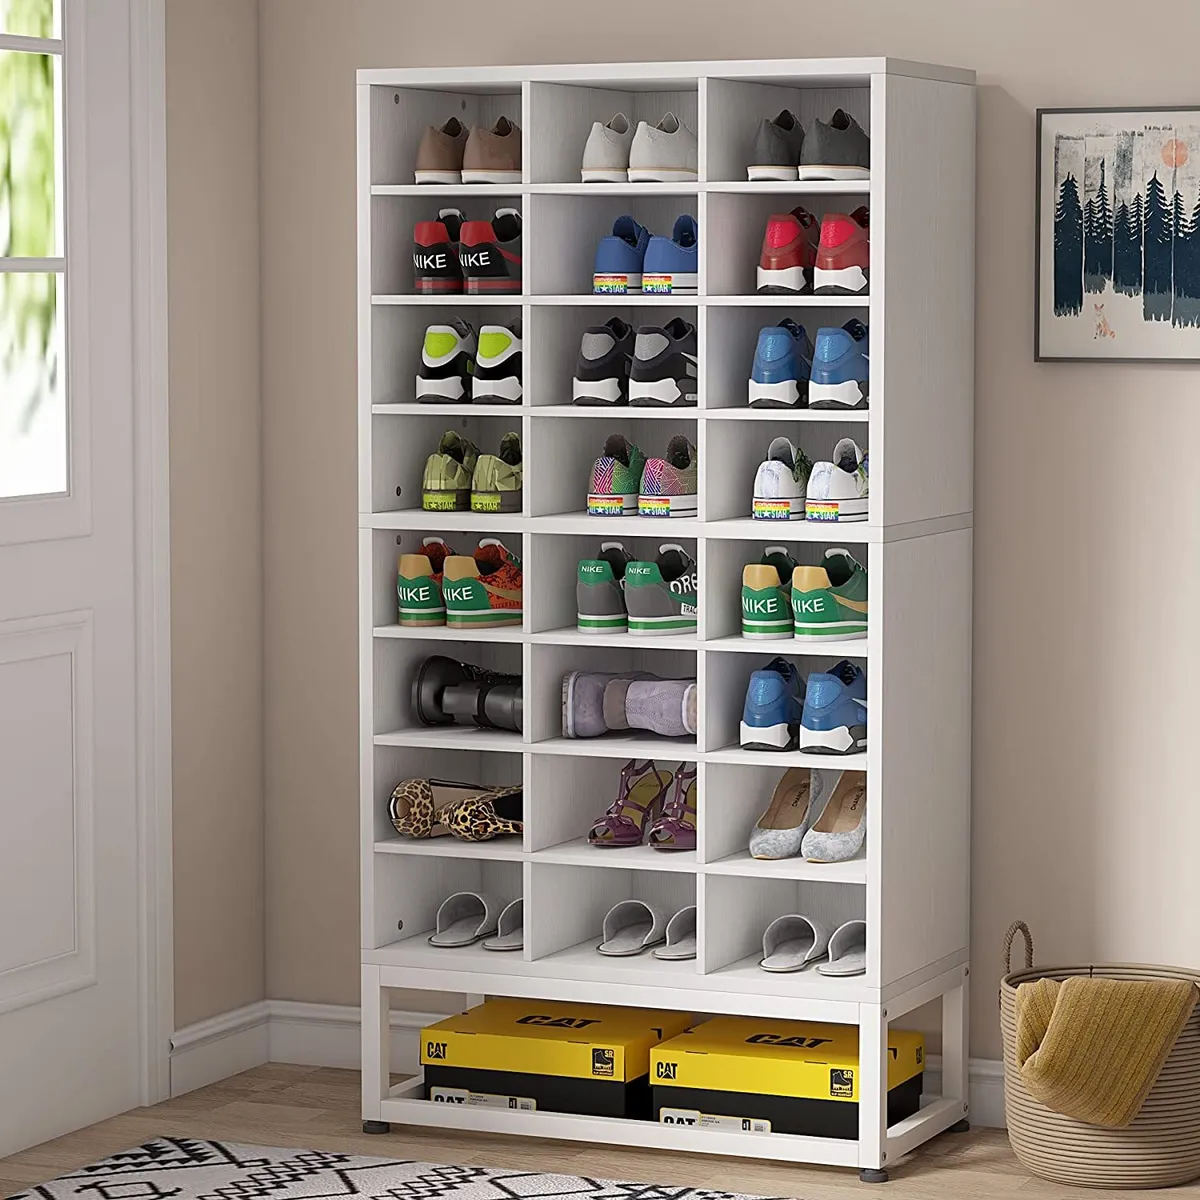 White Wood Shoe Cabinet Cubby Shoe Rack Storage Organizer for